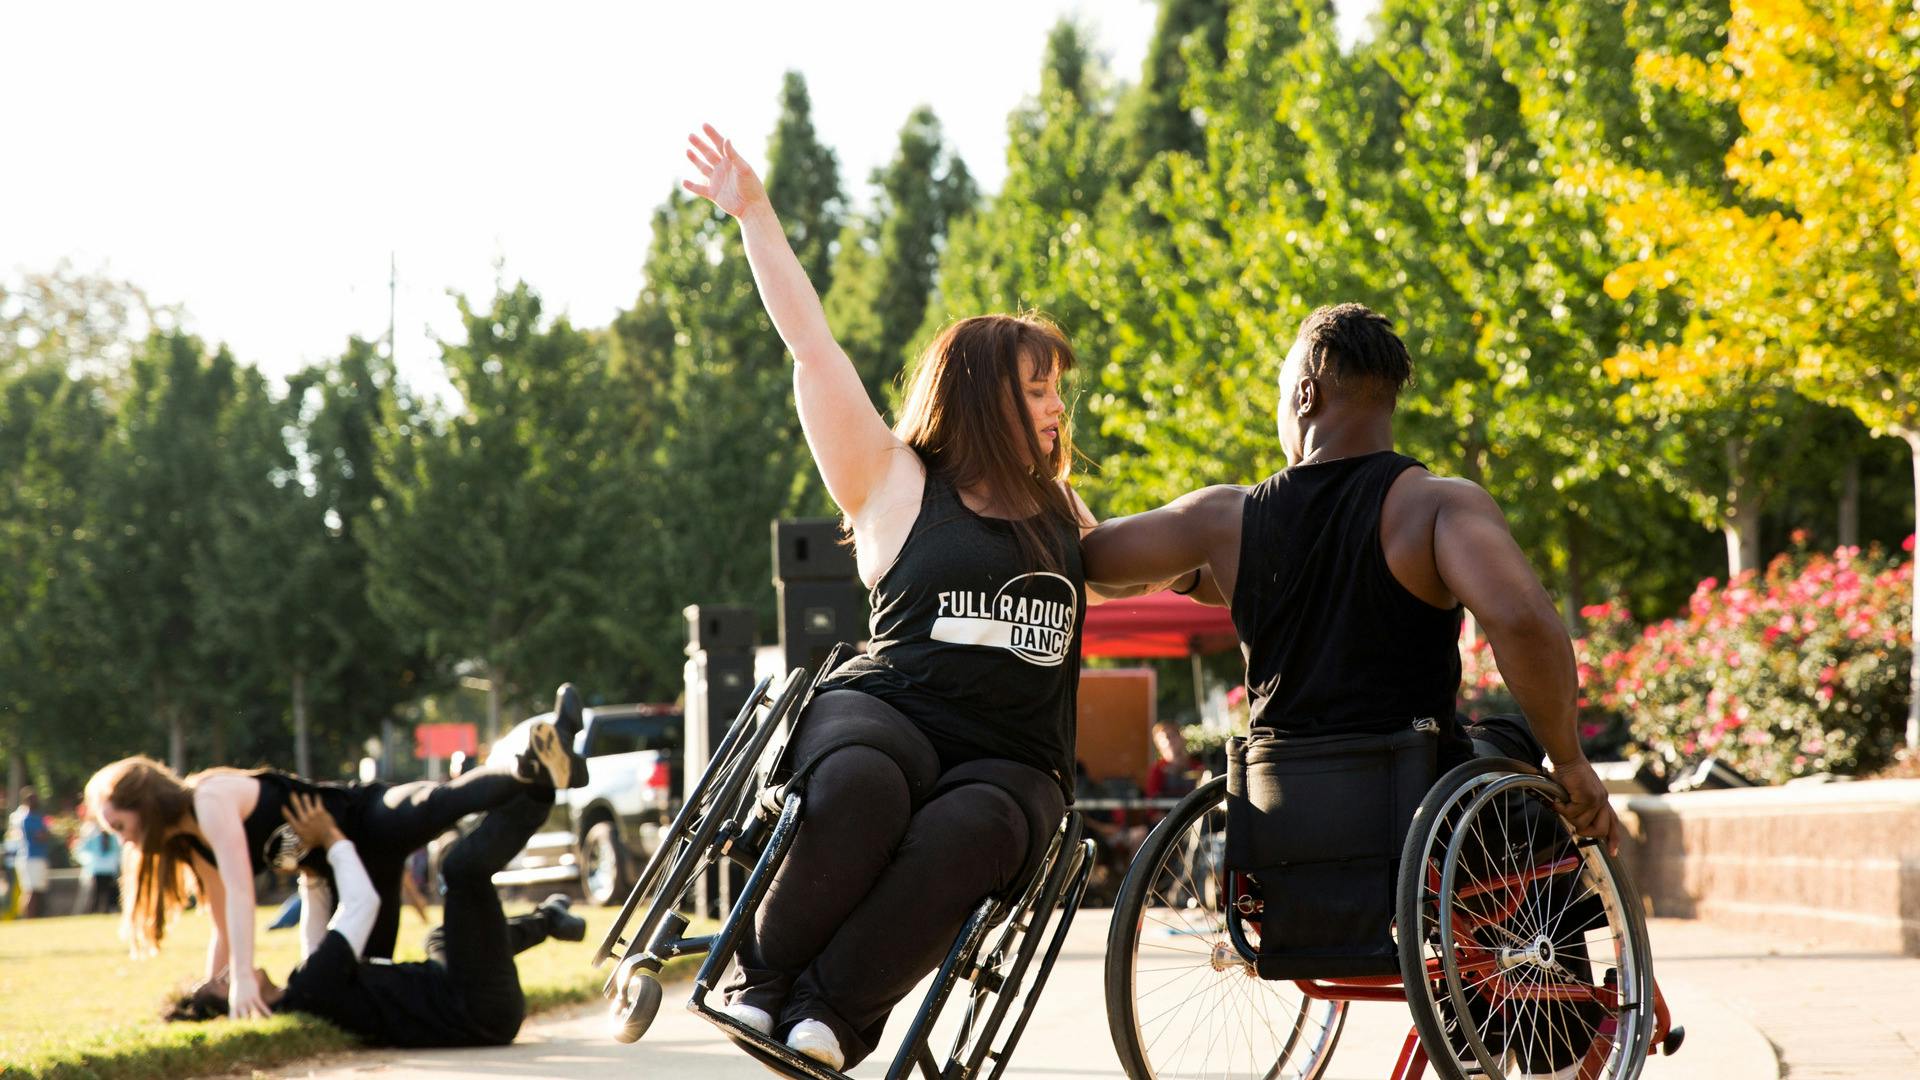 People perform a dance routine in wheelchairs.